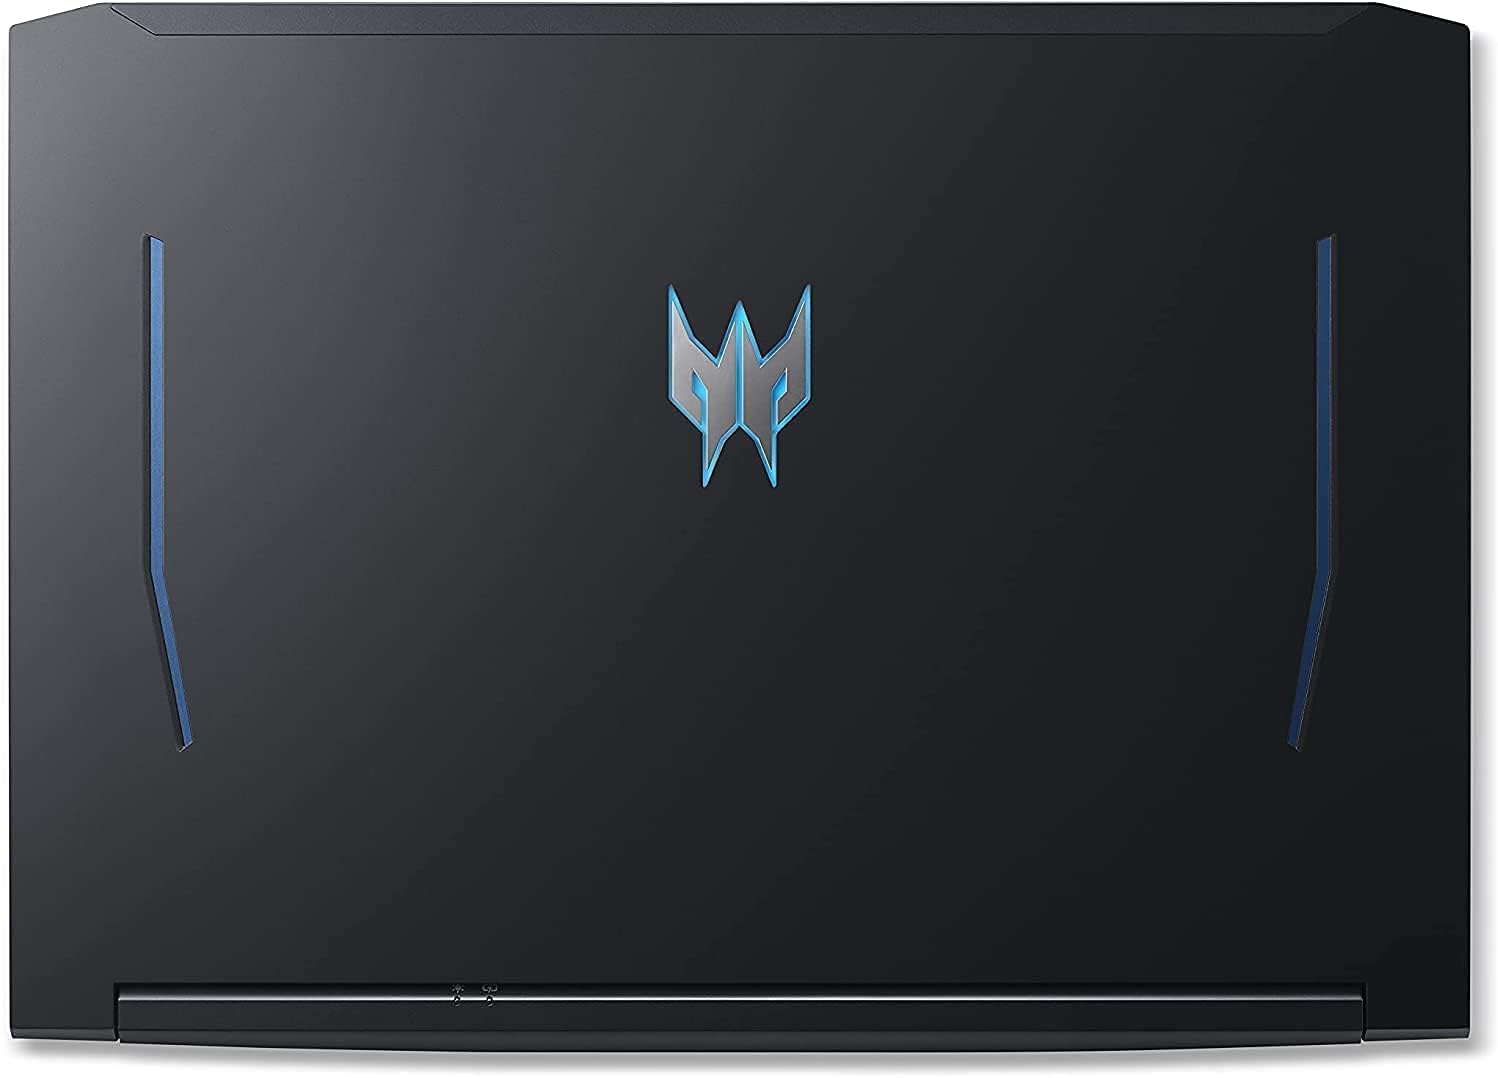 High-Performance Acer Predator Helios 300 Laptop with 15.6 FHD Display and Backlit Keyboard 0193199353610